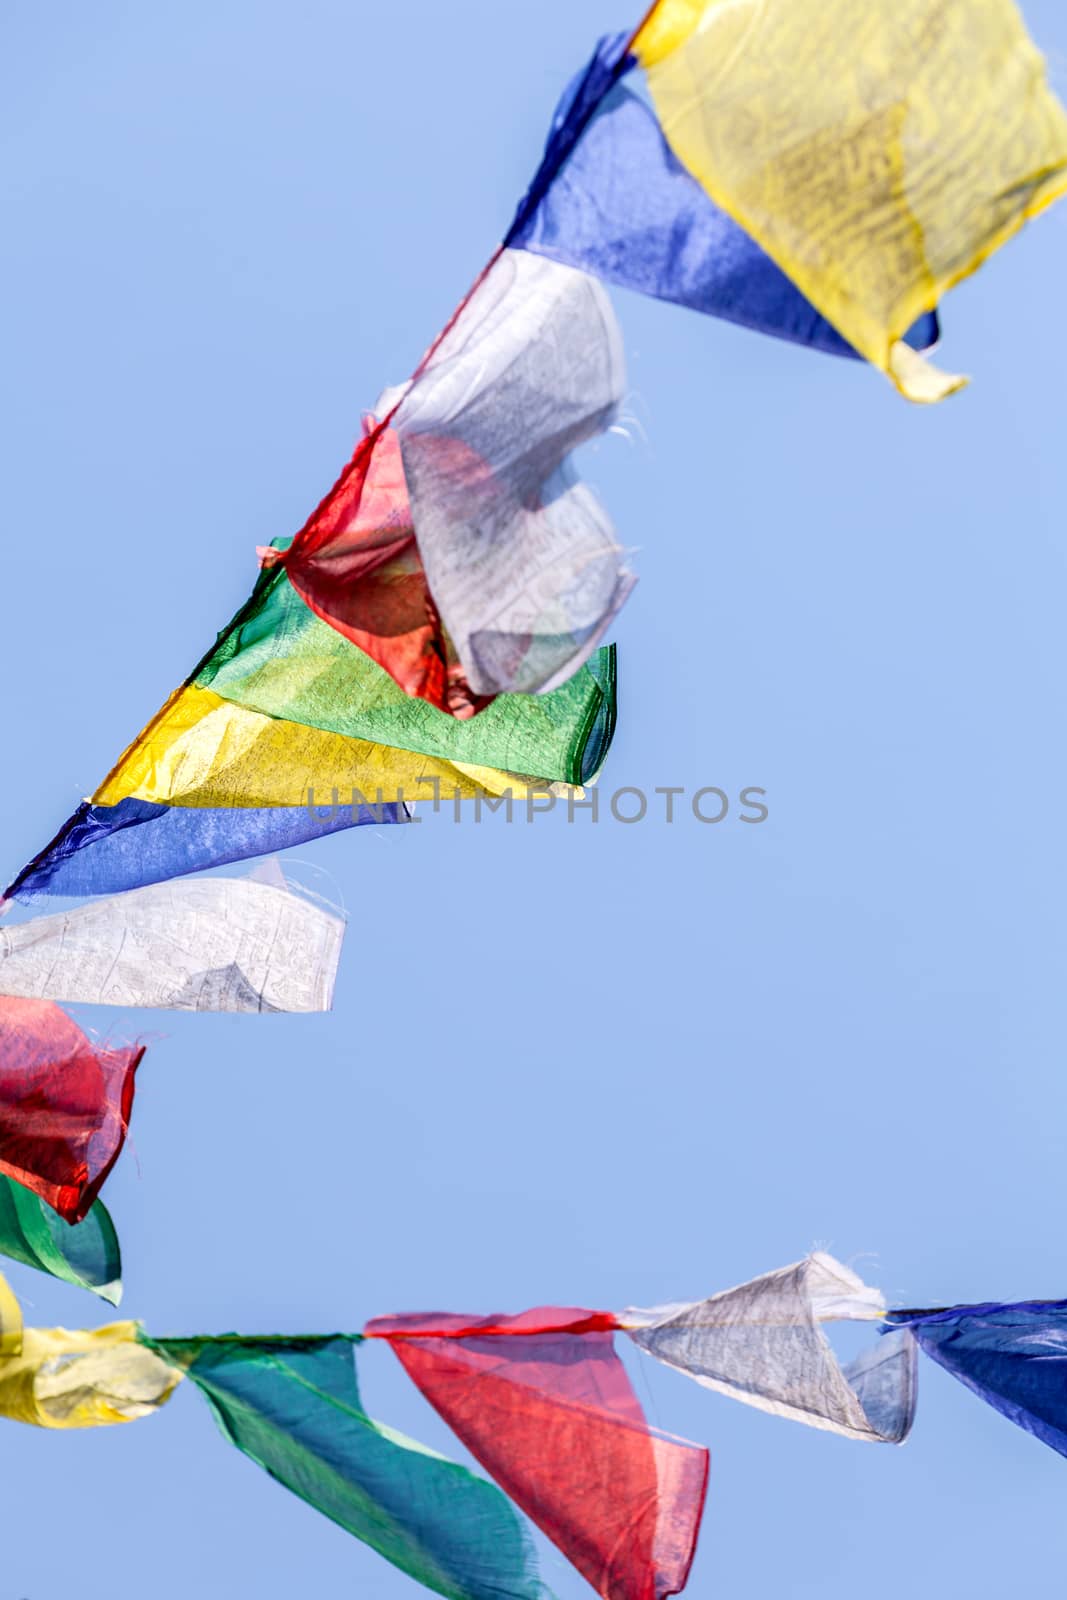 Buddhist prayer flags the holy traditional flag in Bhutan by kerdkanno